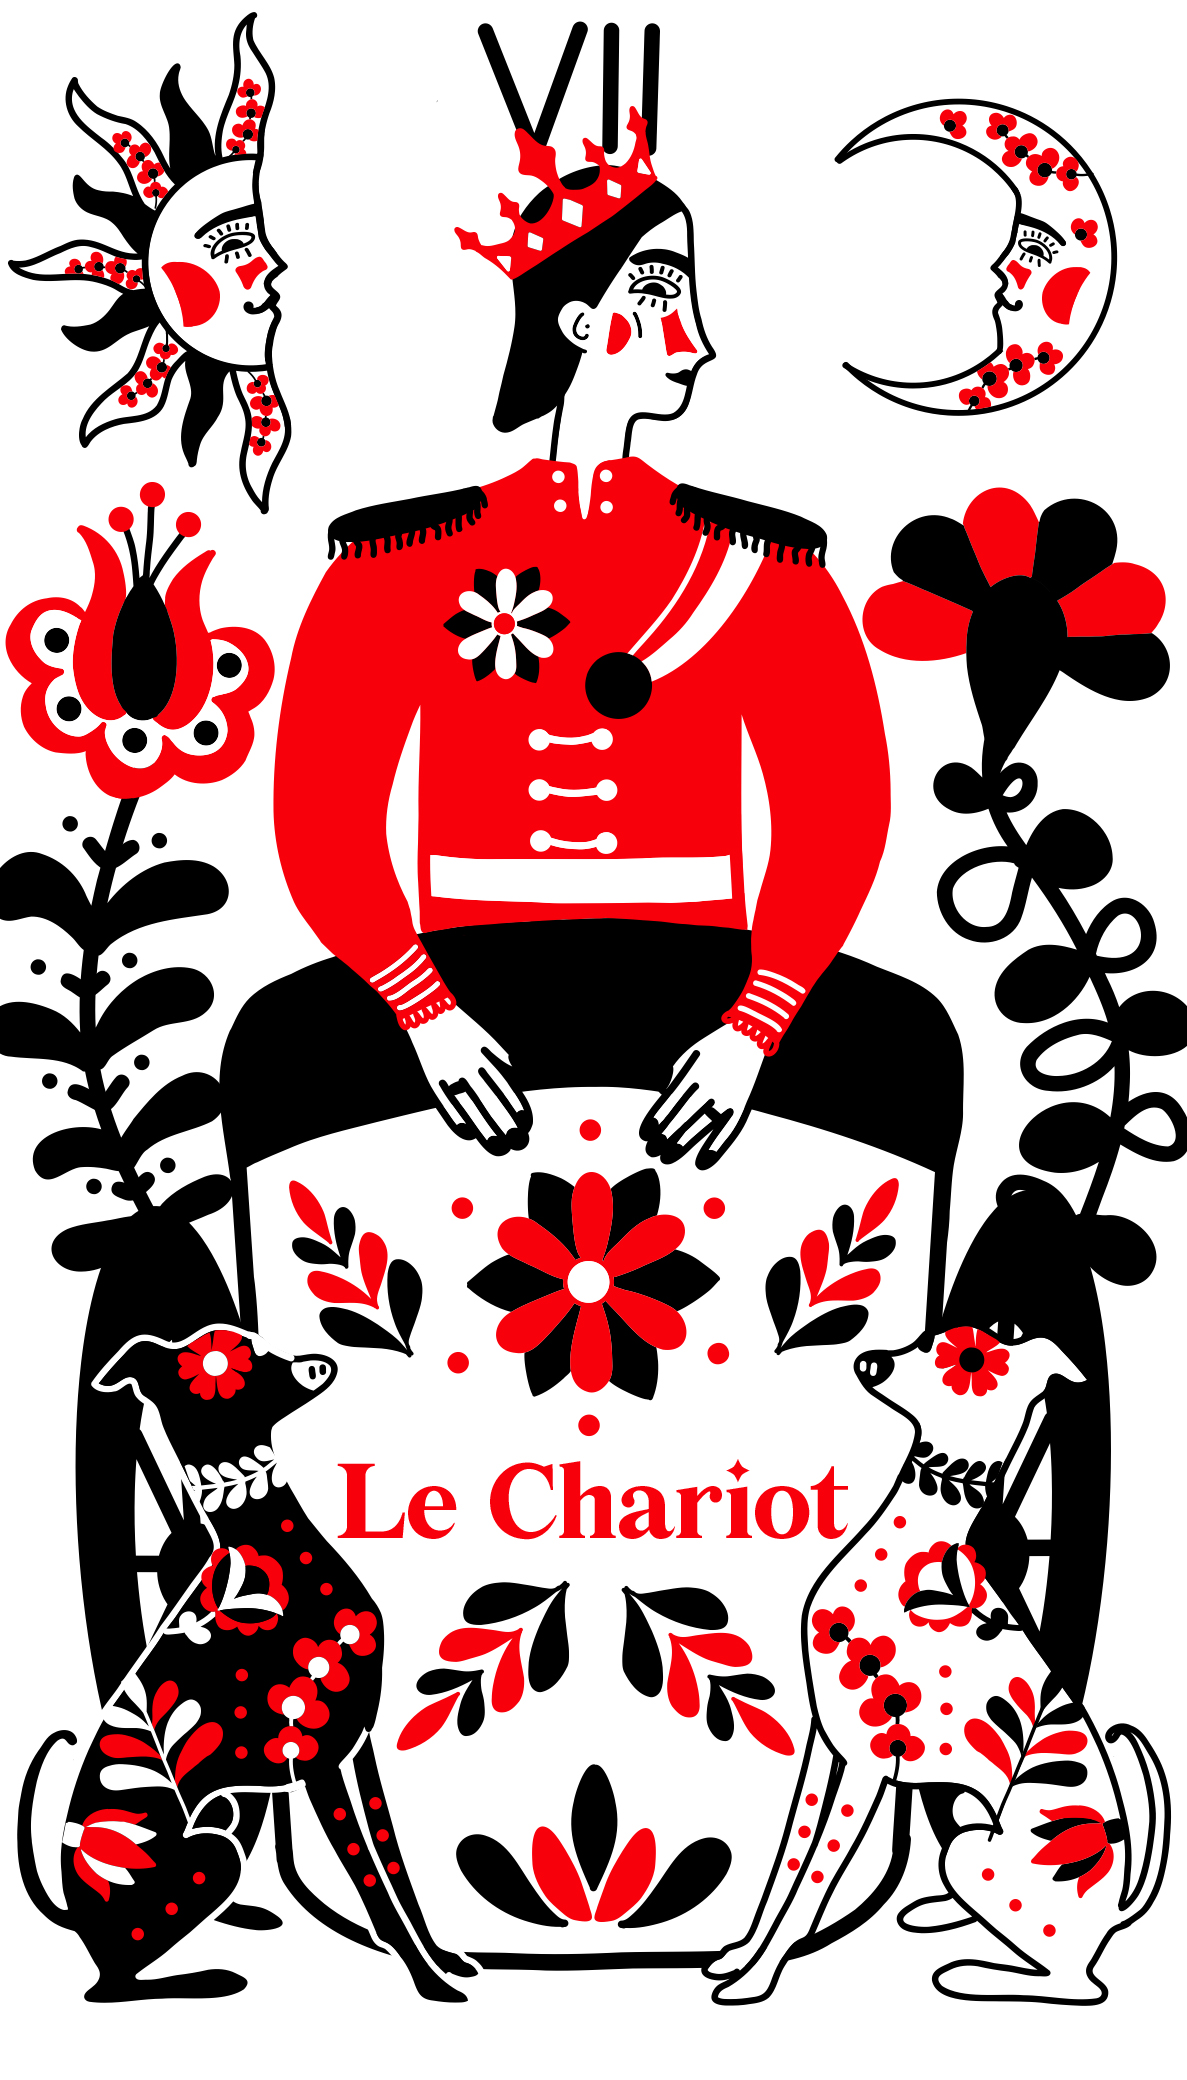 VII. Le Chariot